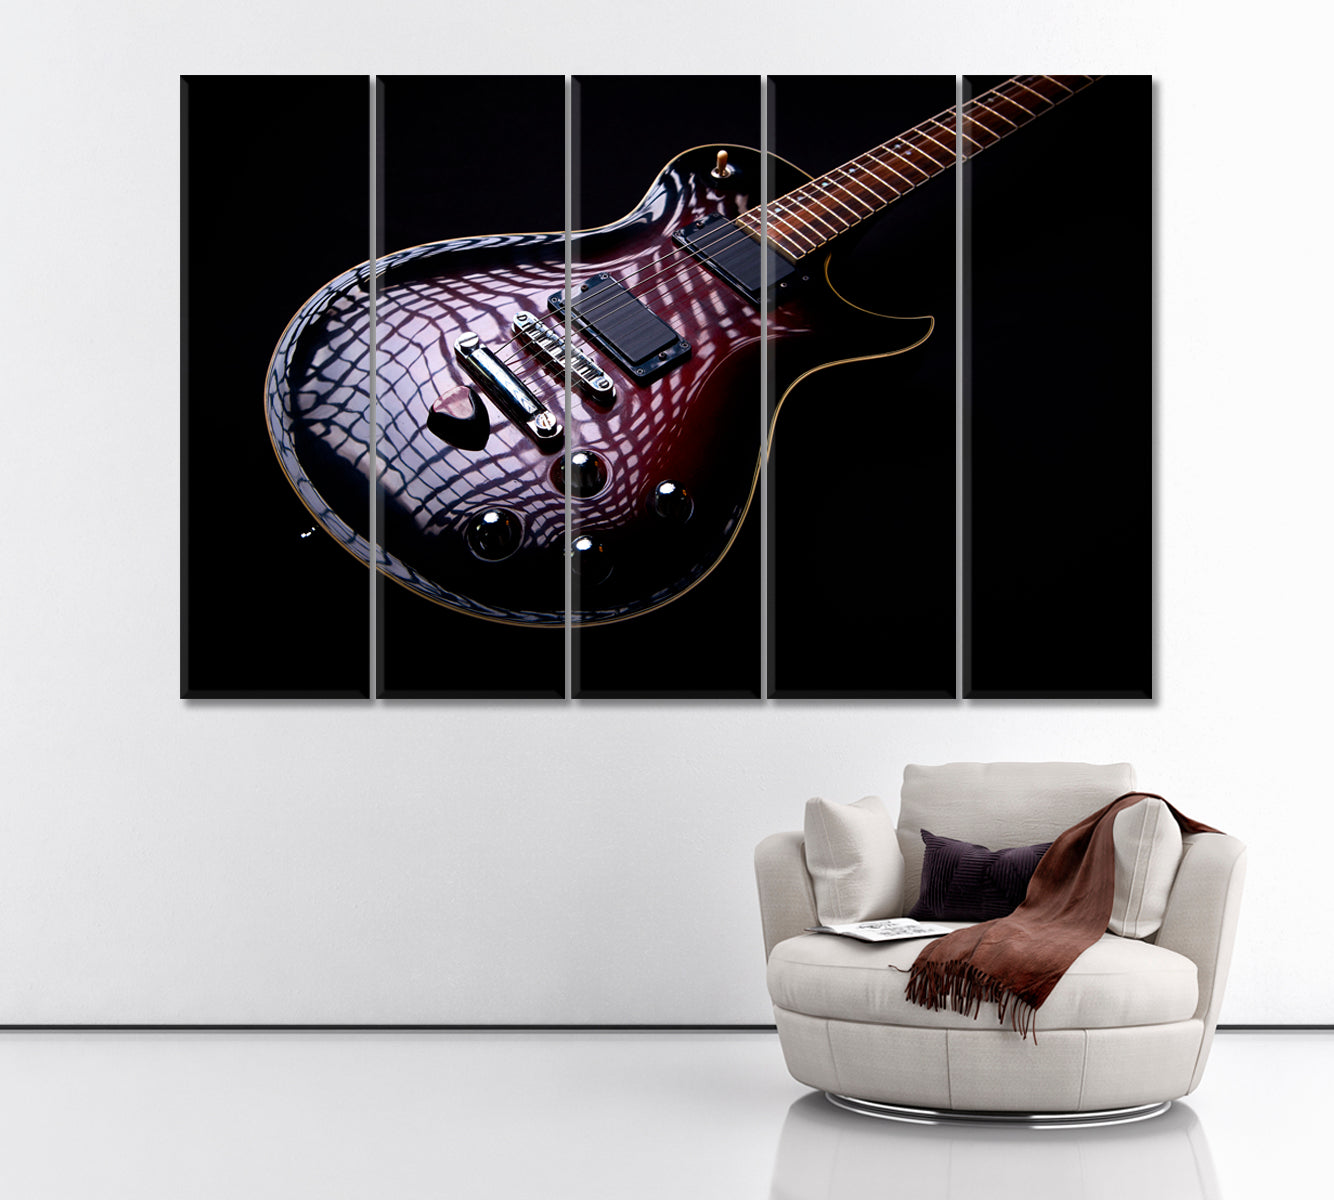 Gibson Les Paul Electric Guitar Canvas Print ArtLexy 5 Panels 36"x24" inches 